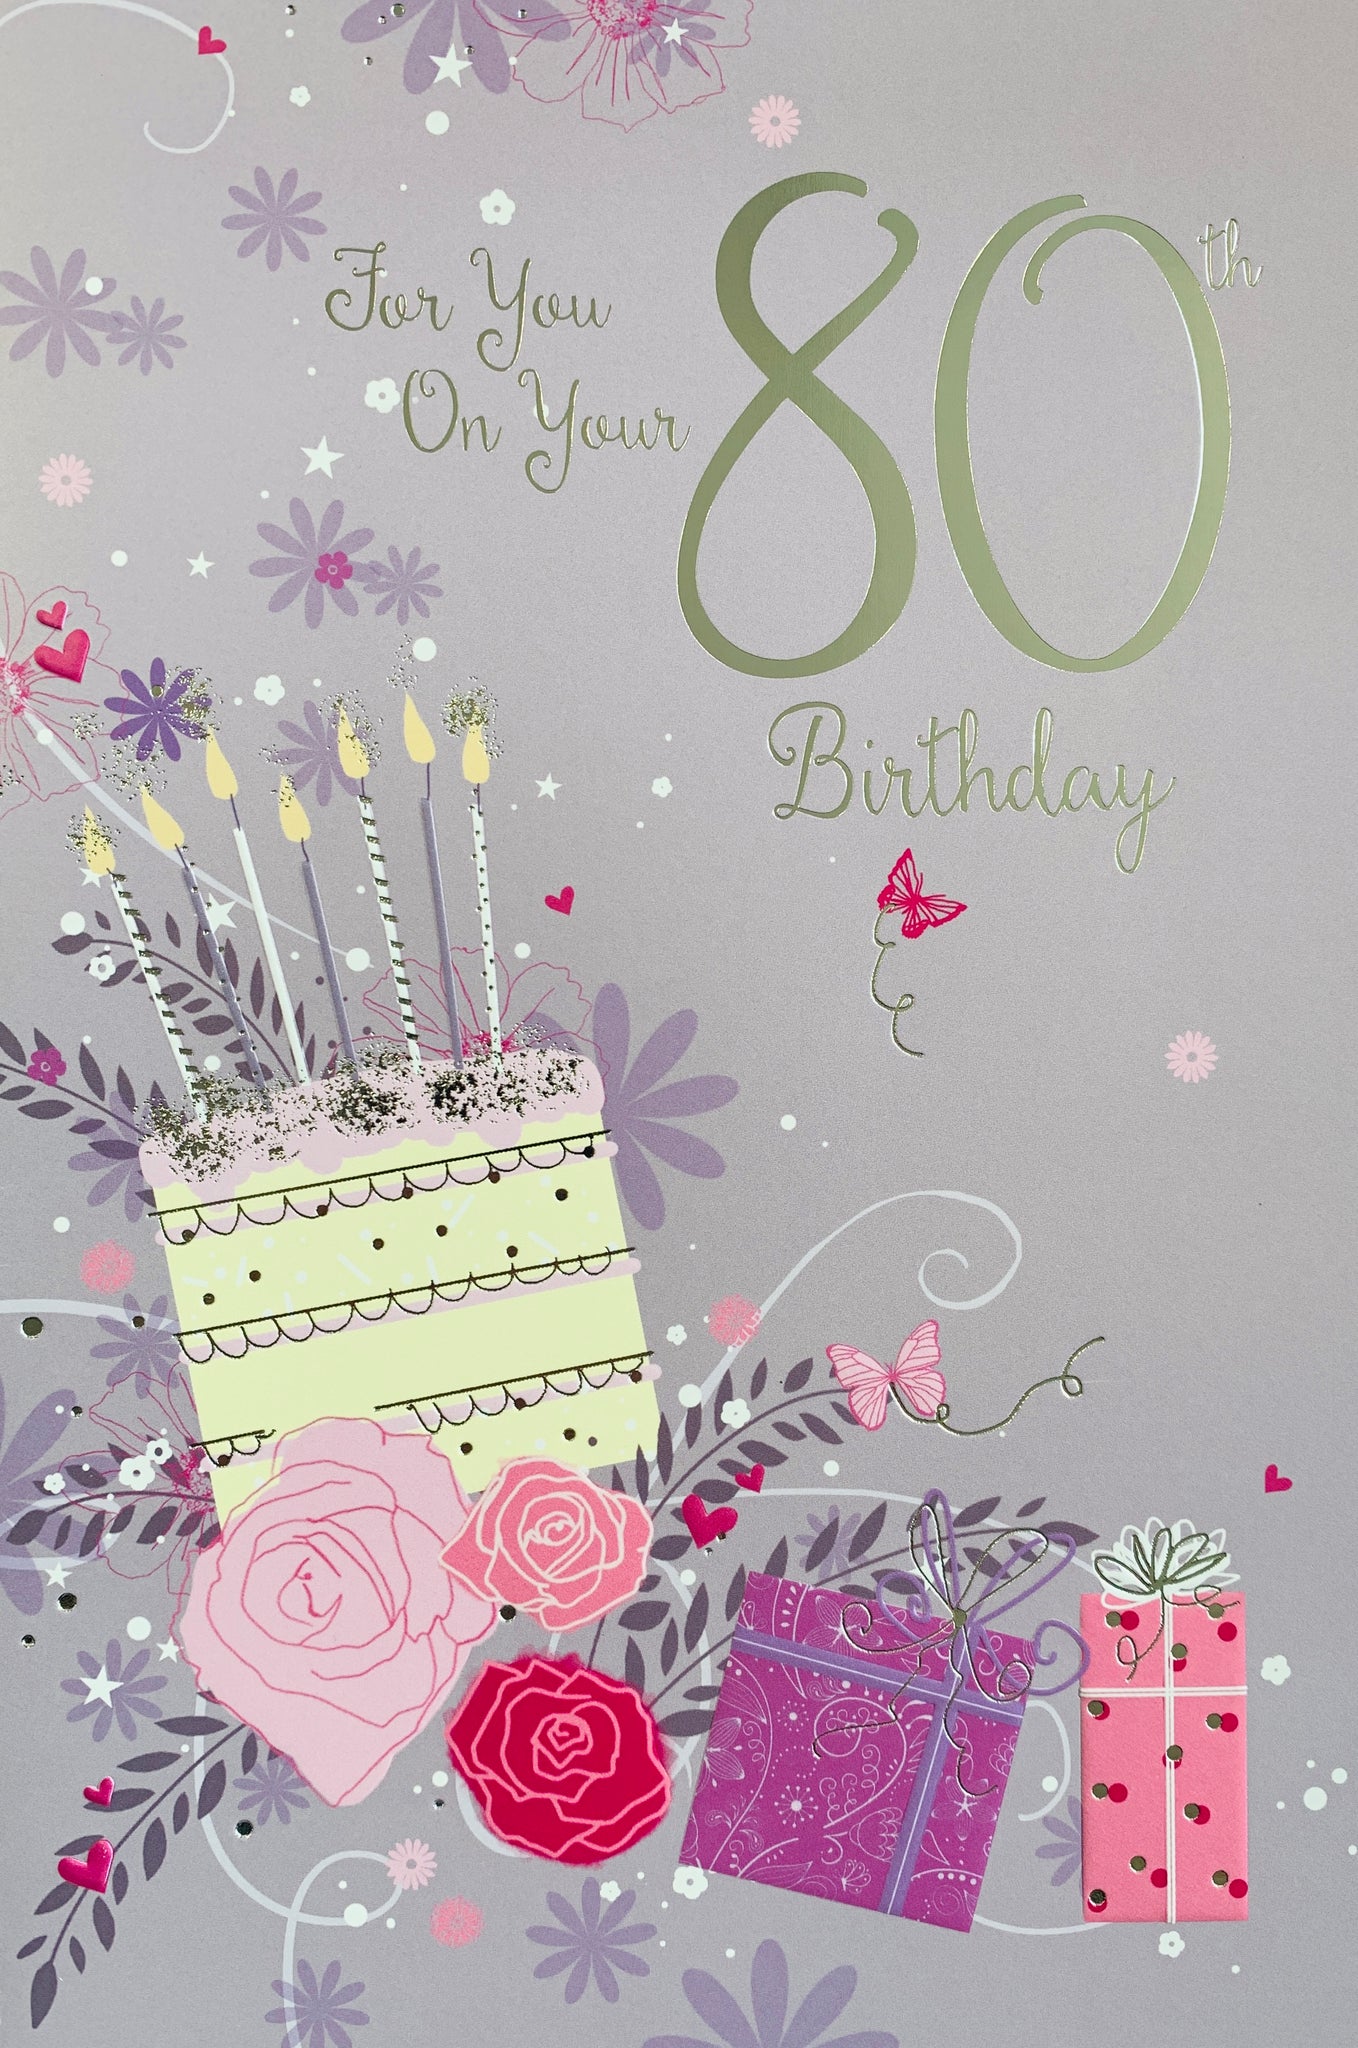 80th birthday card - cake and flowers